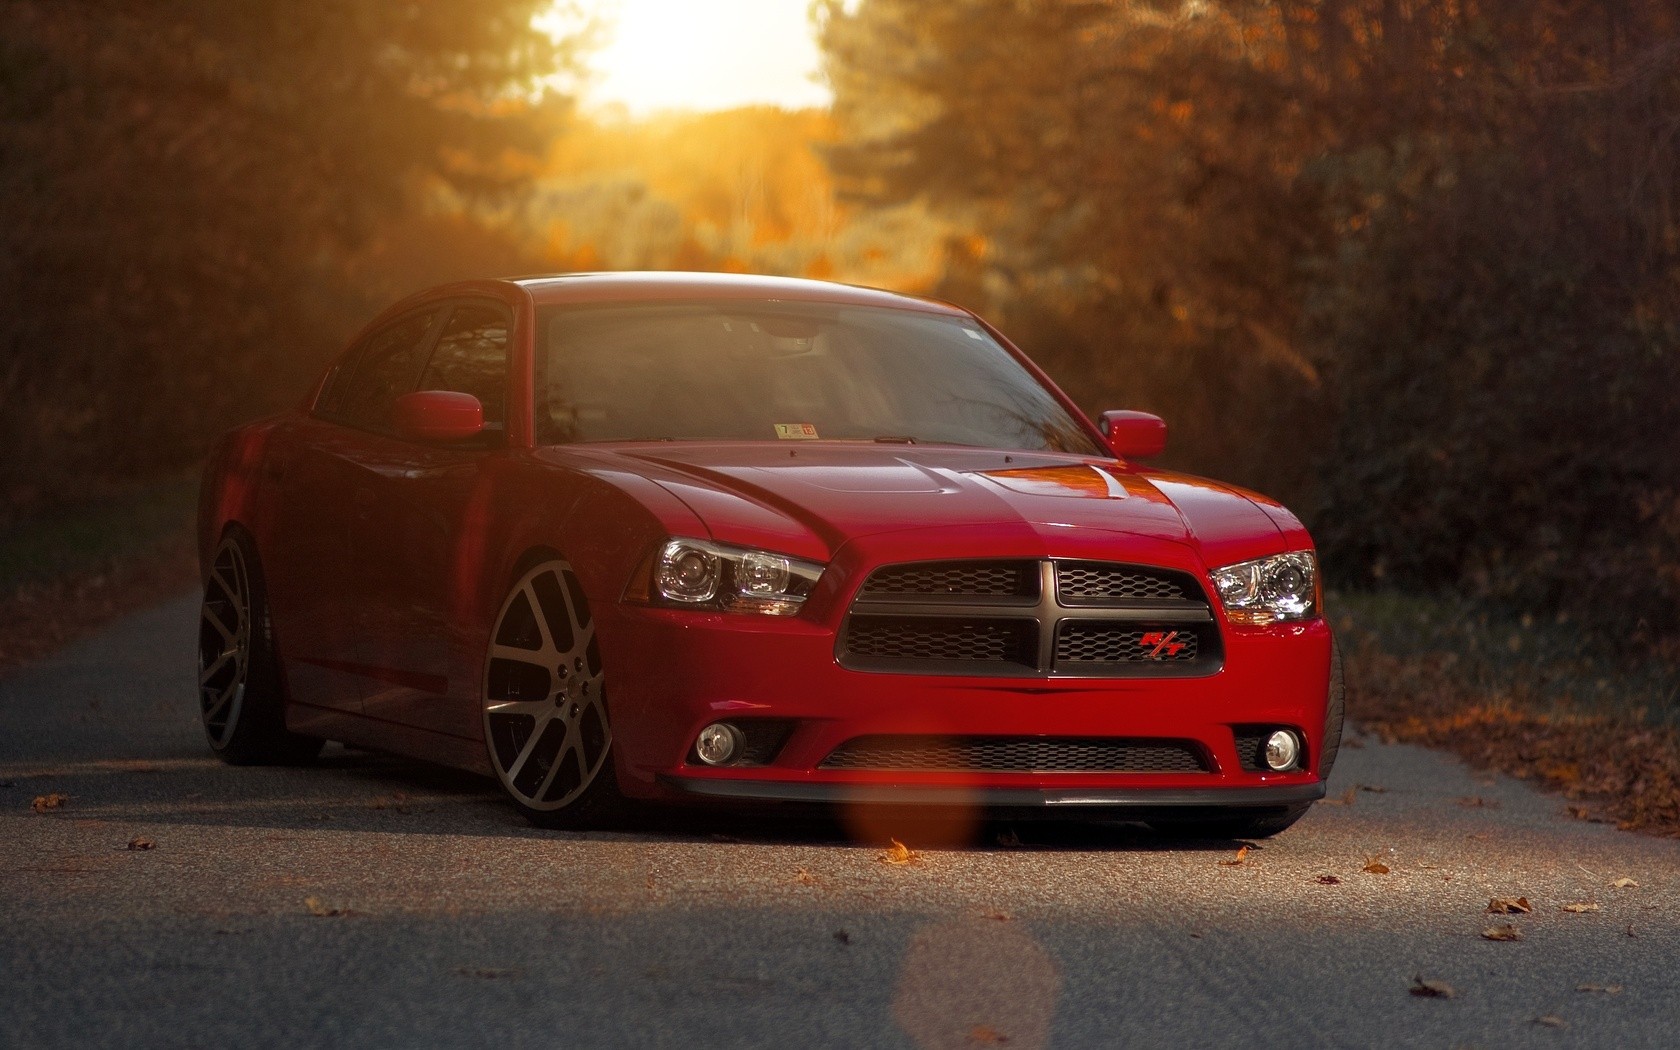 General 1680x1050 car Dodge Charger red cars vehicle Dodge muscle cars American cars Stellantis